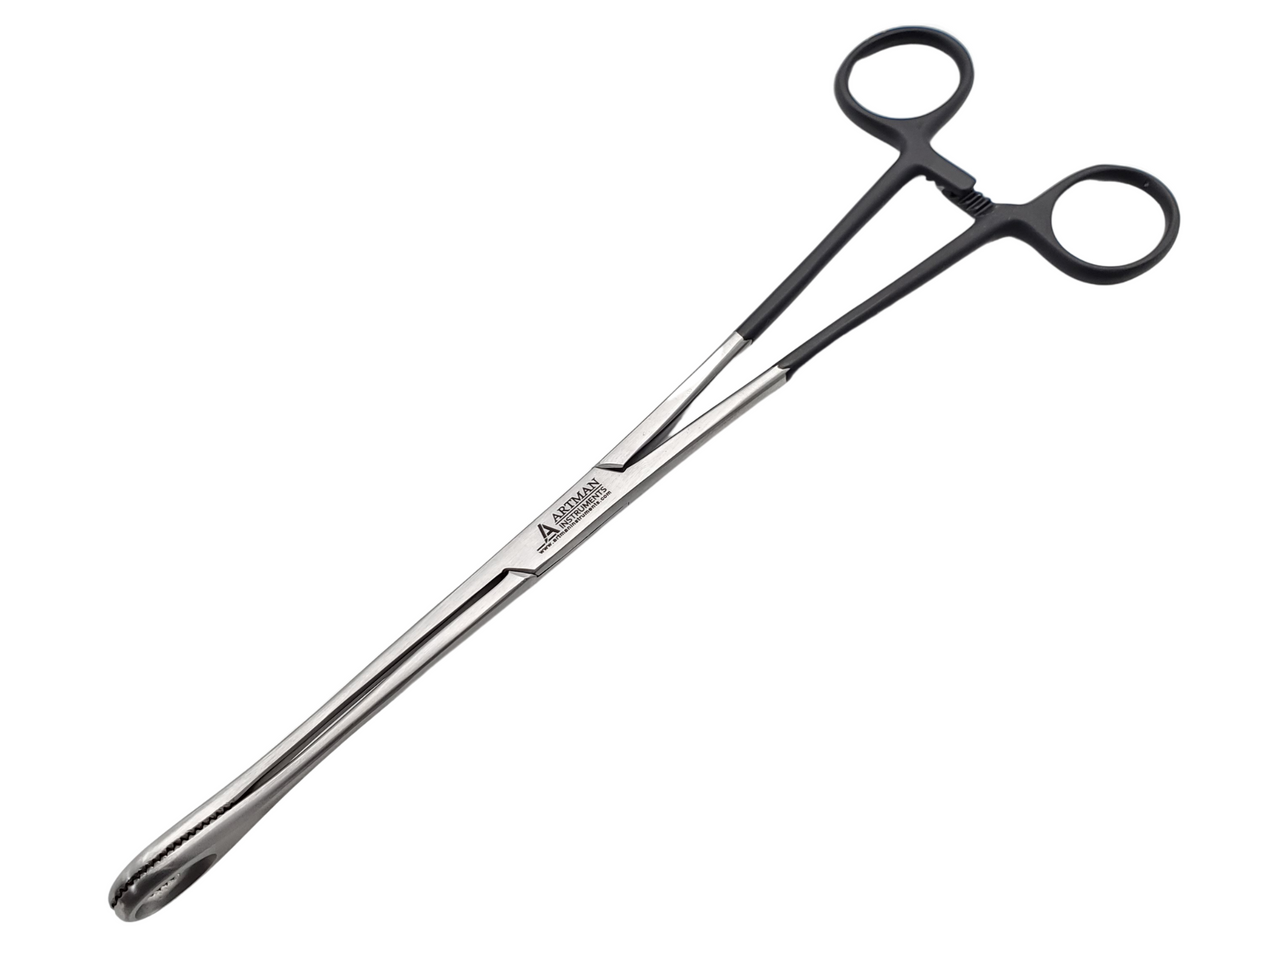 Foerster Sponge Forceps 9.5" Straight Serrated Surgical Holding Forcpes ARTMAN